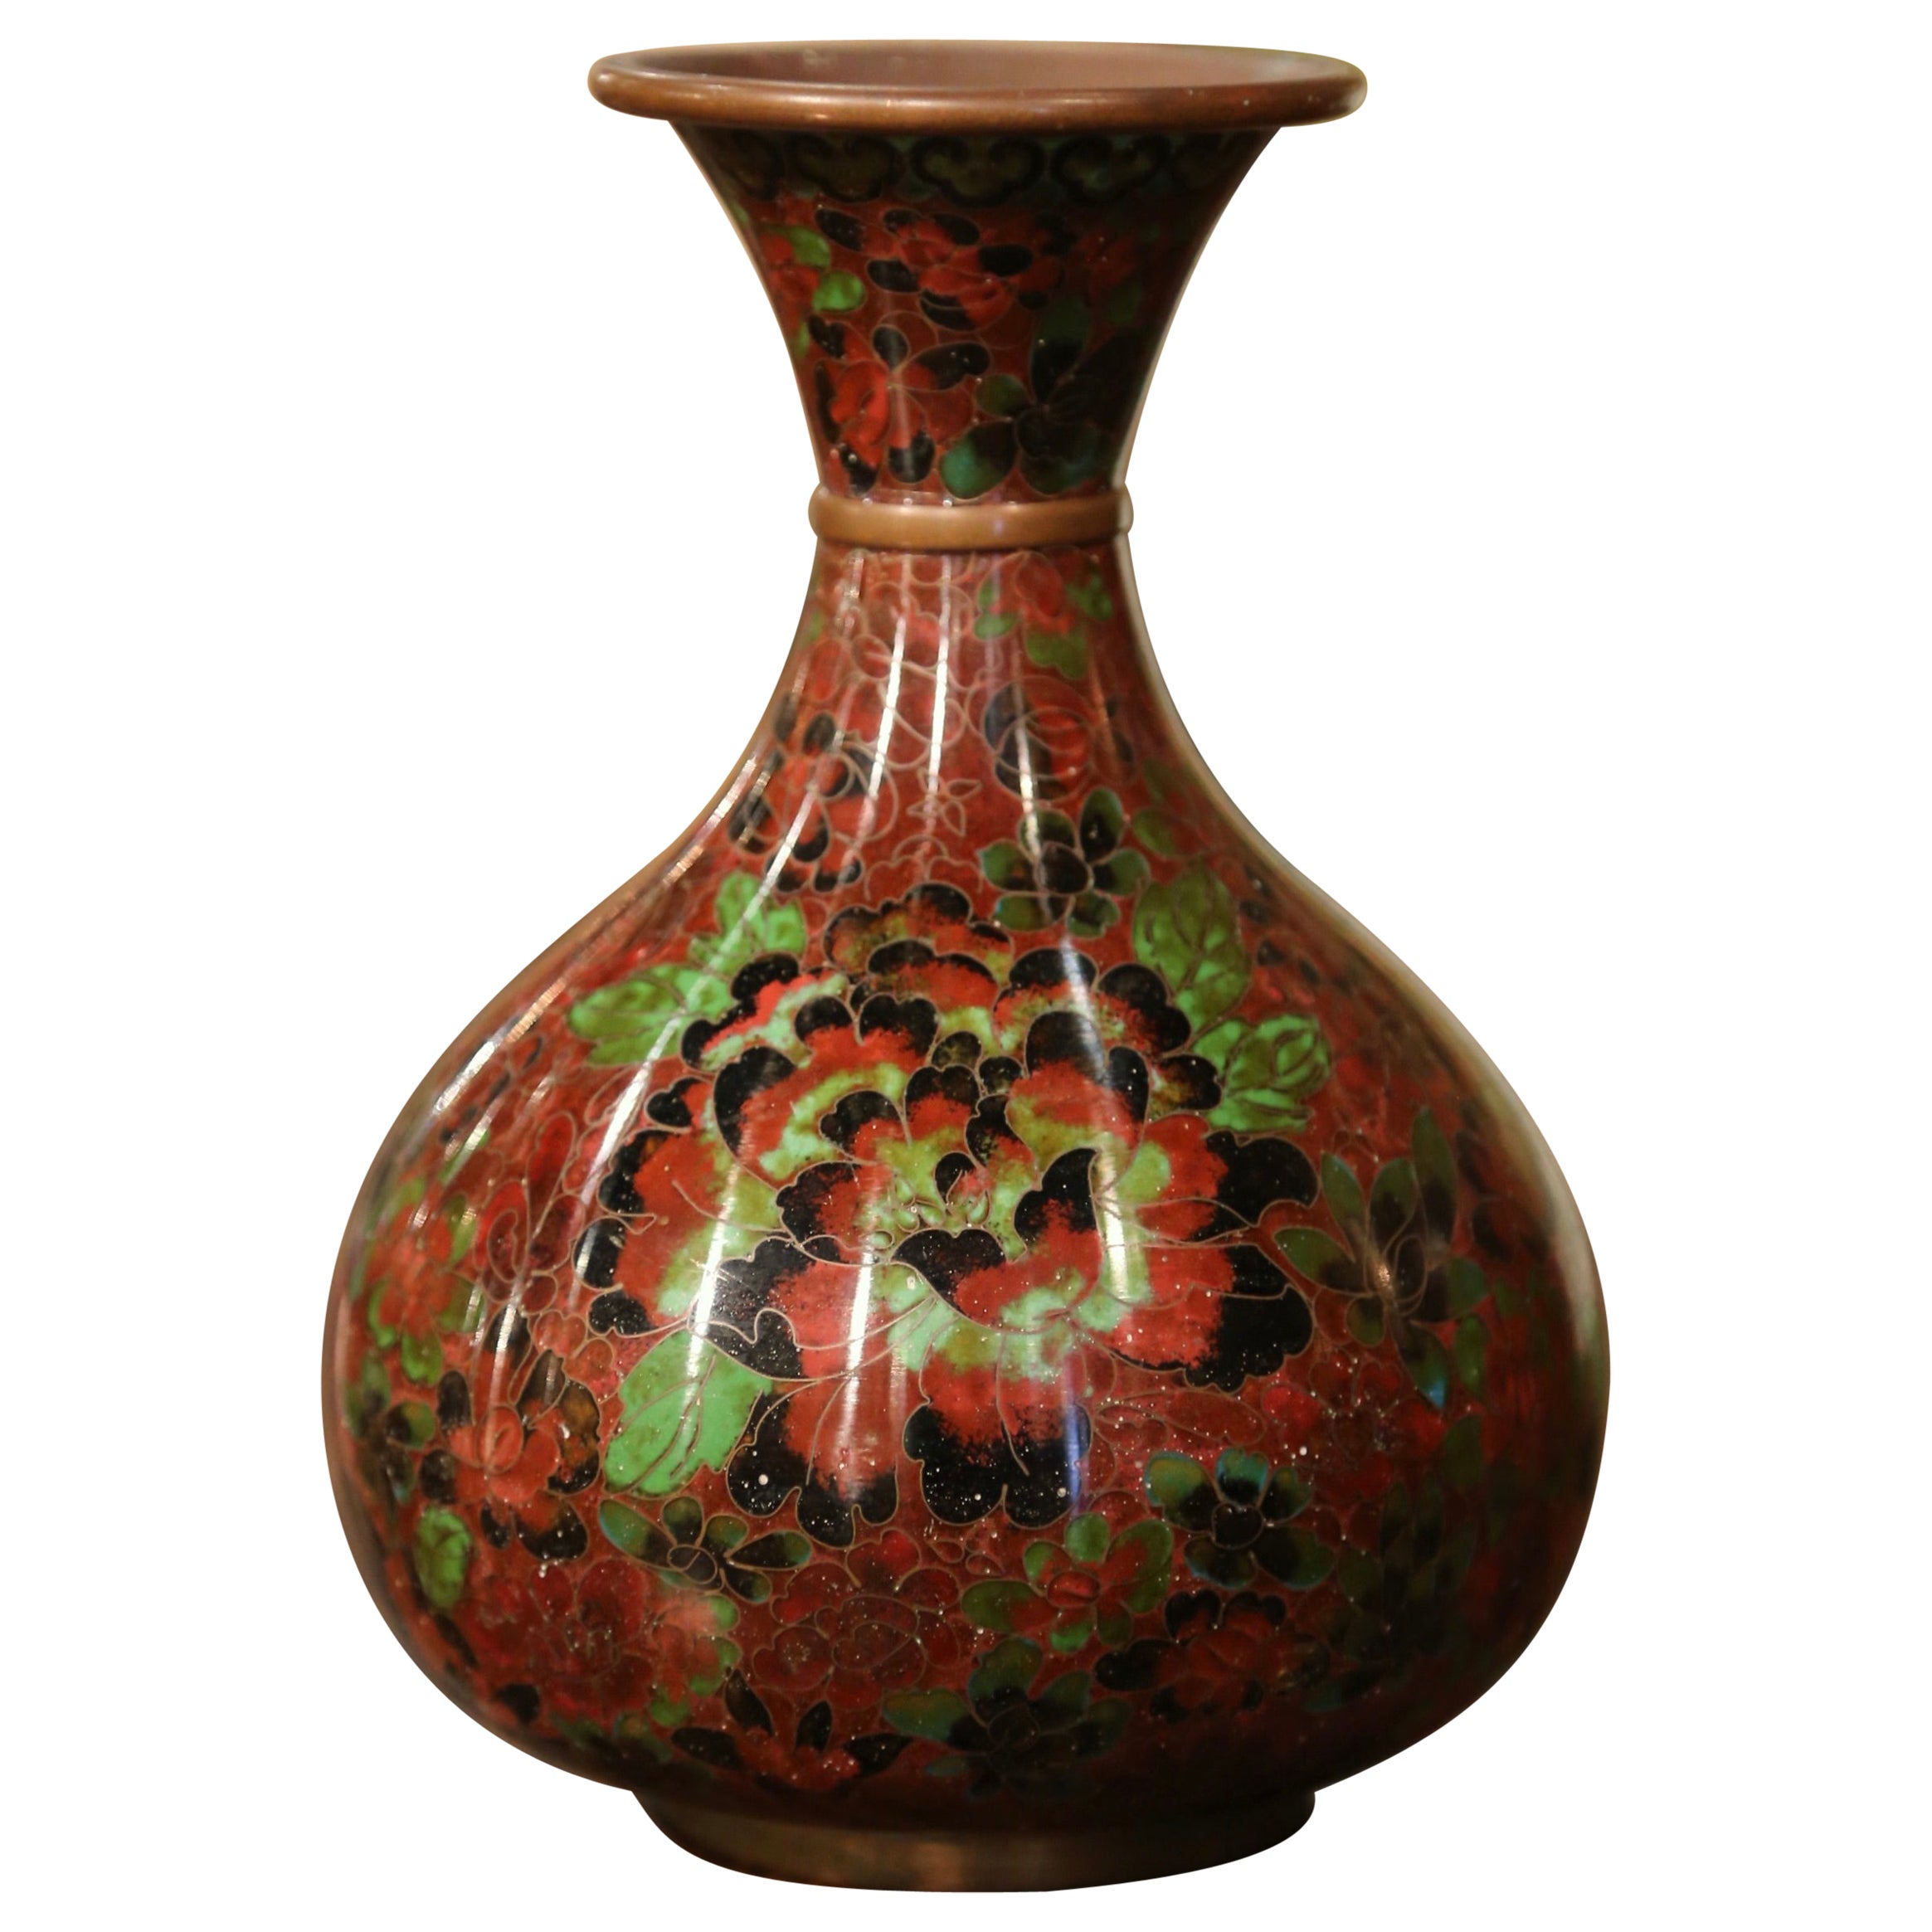 Vintage Chinese Cloisonne Enamel Vase with Floral Motifs on Wooden Stand